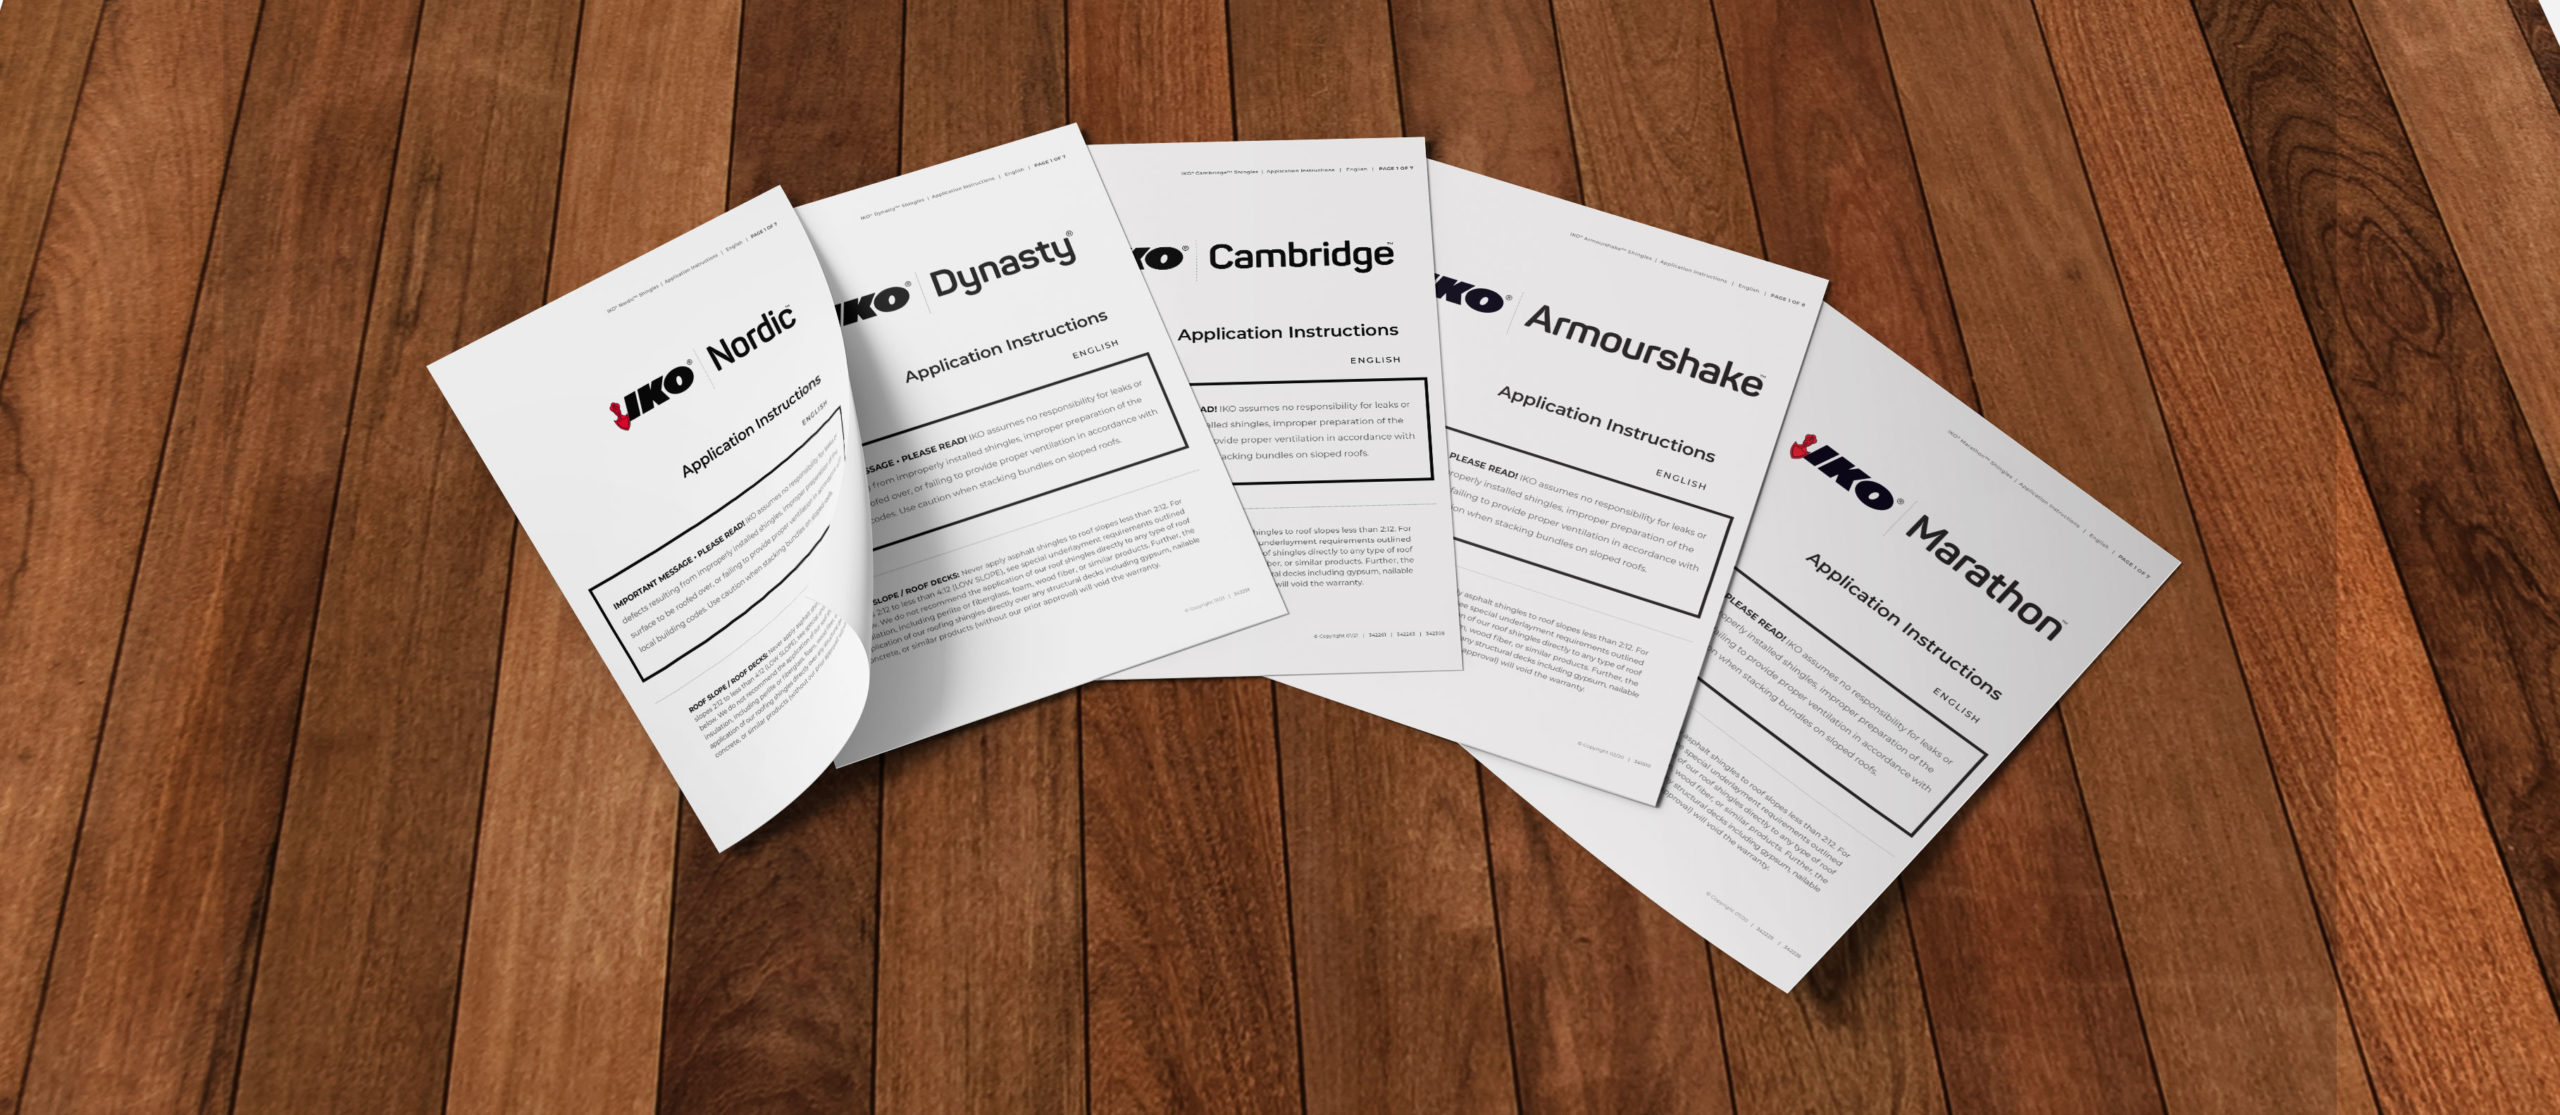 Application Instruction sheets laid out in a table